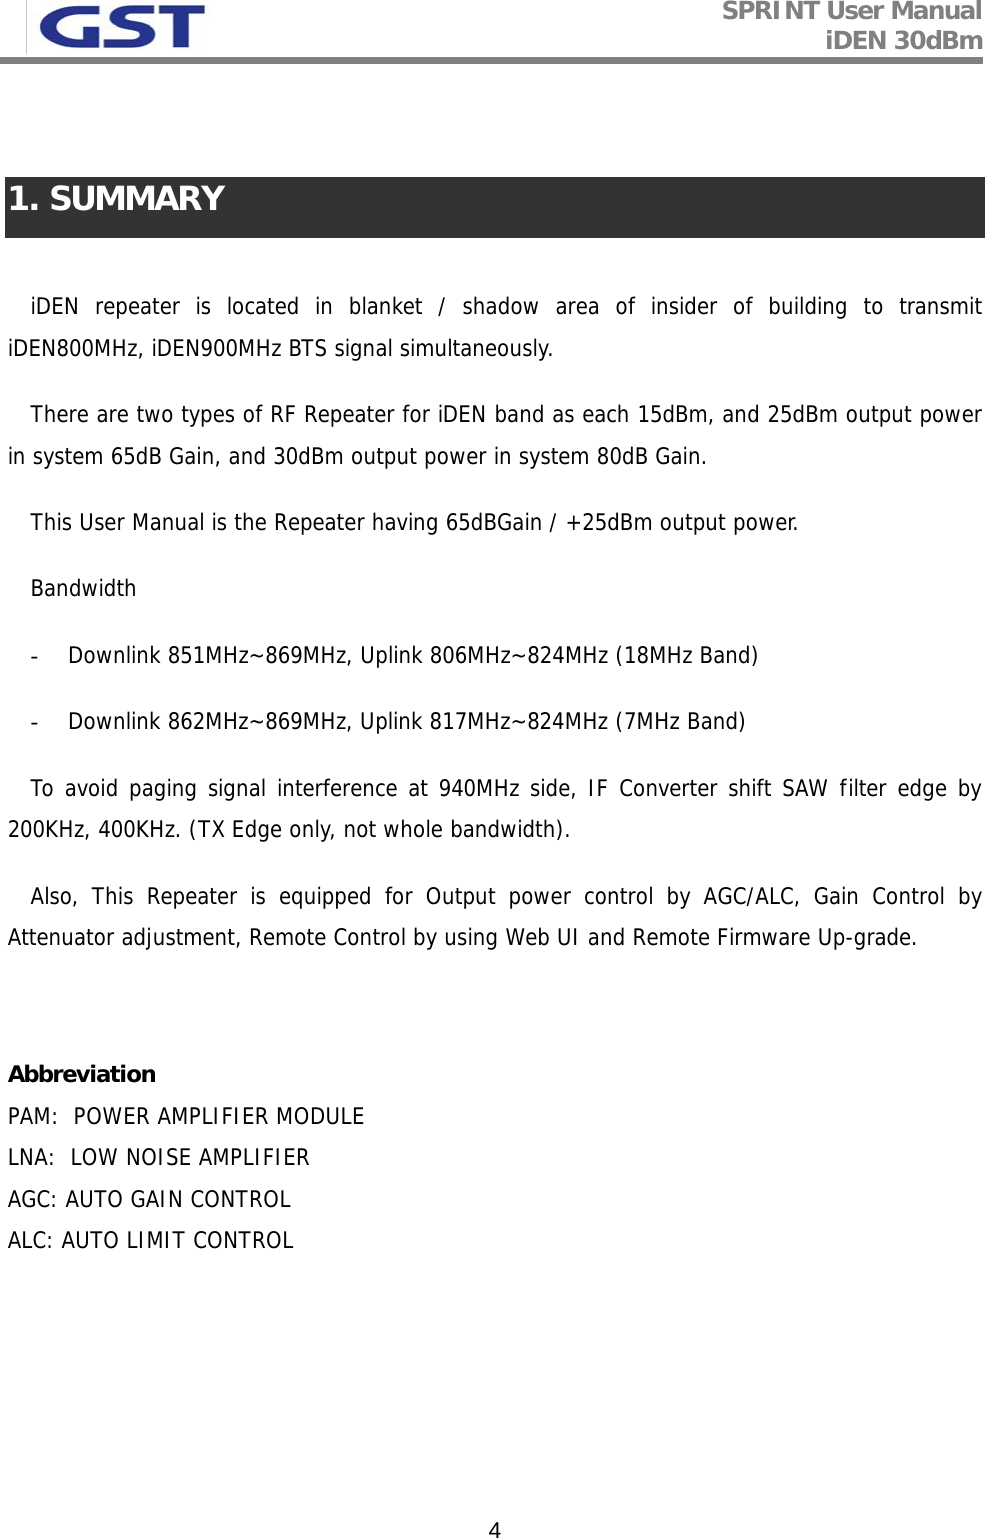 SPRINT User Manual iDEN 30dBm   4  1. SUMMARY  iDEN repeater is located in blanket / shadow area of insider of building to transmit iDEN800MHz, iDEN900MHz BTS signal simultaneously. There are two types of RF Repeater for iDEN band as each 15dBm, and 25dBm output power in system 65dB Gain, and 30dBm output power in system 80dB Gain. This User Manual is the Repeater having 65dBGain / +25dBm output power.  Bandwidth - Downlink 851MHz~869MHz, Uplink 806MHz~824MHz (18MHz Band) - Downlink 862MHz~869MHz, Uplink 817MHz~824MHz (7MHz Band) To avoid paging signal interference at 940MHz side, IF Converter shift SAW filter edge by 200KHz, 400KHz. (TX Edge only, not whole bandwidth). Also, This Repeater is equipped for Output power control by AGC/ALC, Gain Control by Attenuator adjustment, Remote Control by using Web UI and Remote Firmware Up-grade.   Abbreviation  PAM:  POWER AMPLIFIER MODULE LNA:  LOW NOISE AMPLIFIER AGC: AUTO GAIN CONTROL ALC: AUTO LIMIT CONTROL     